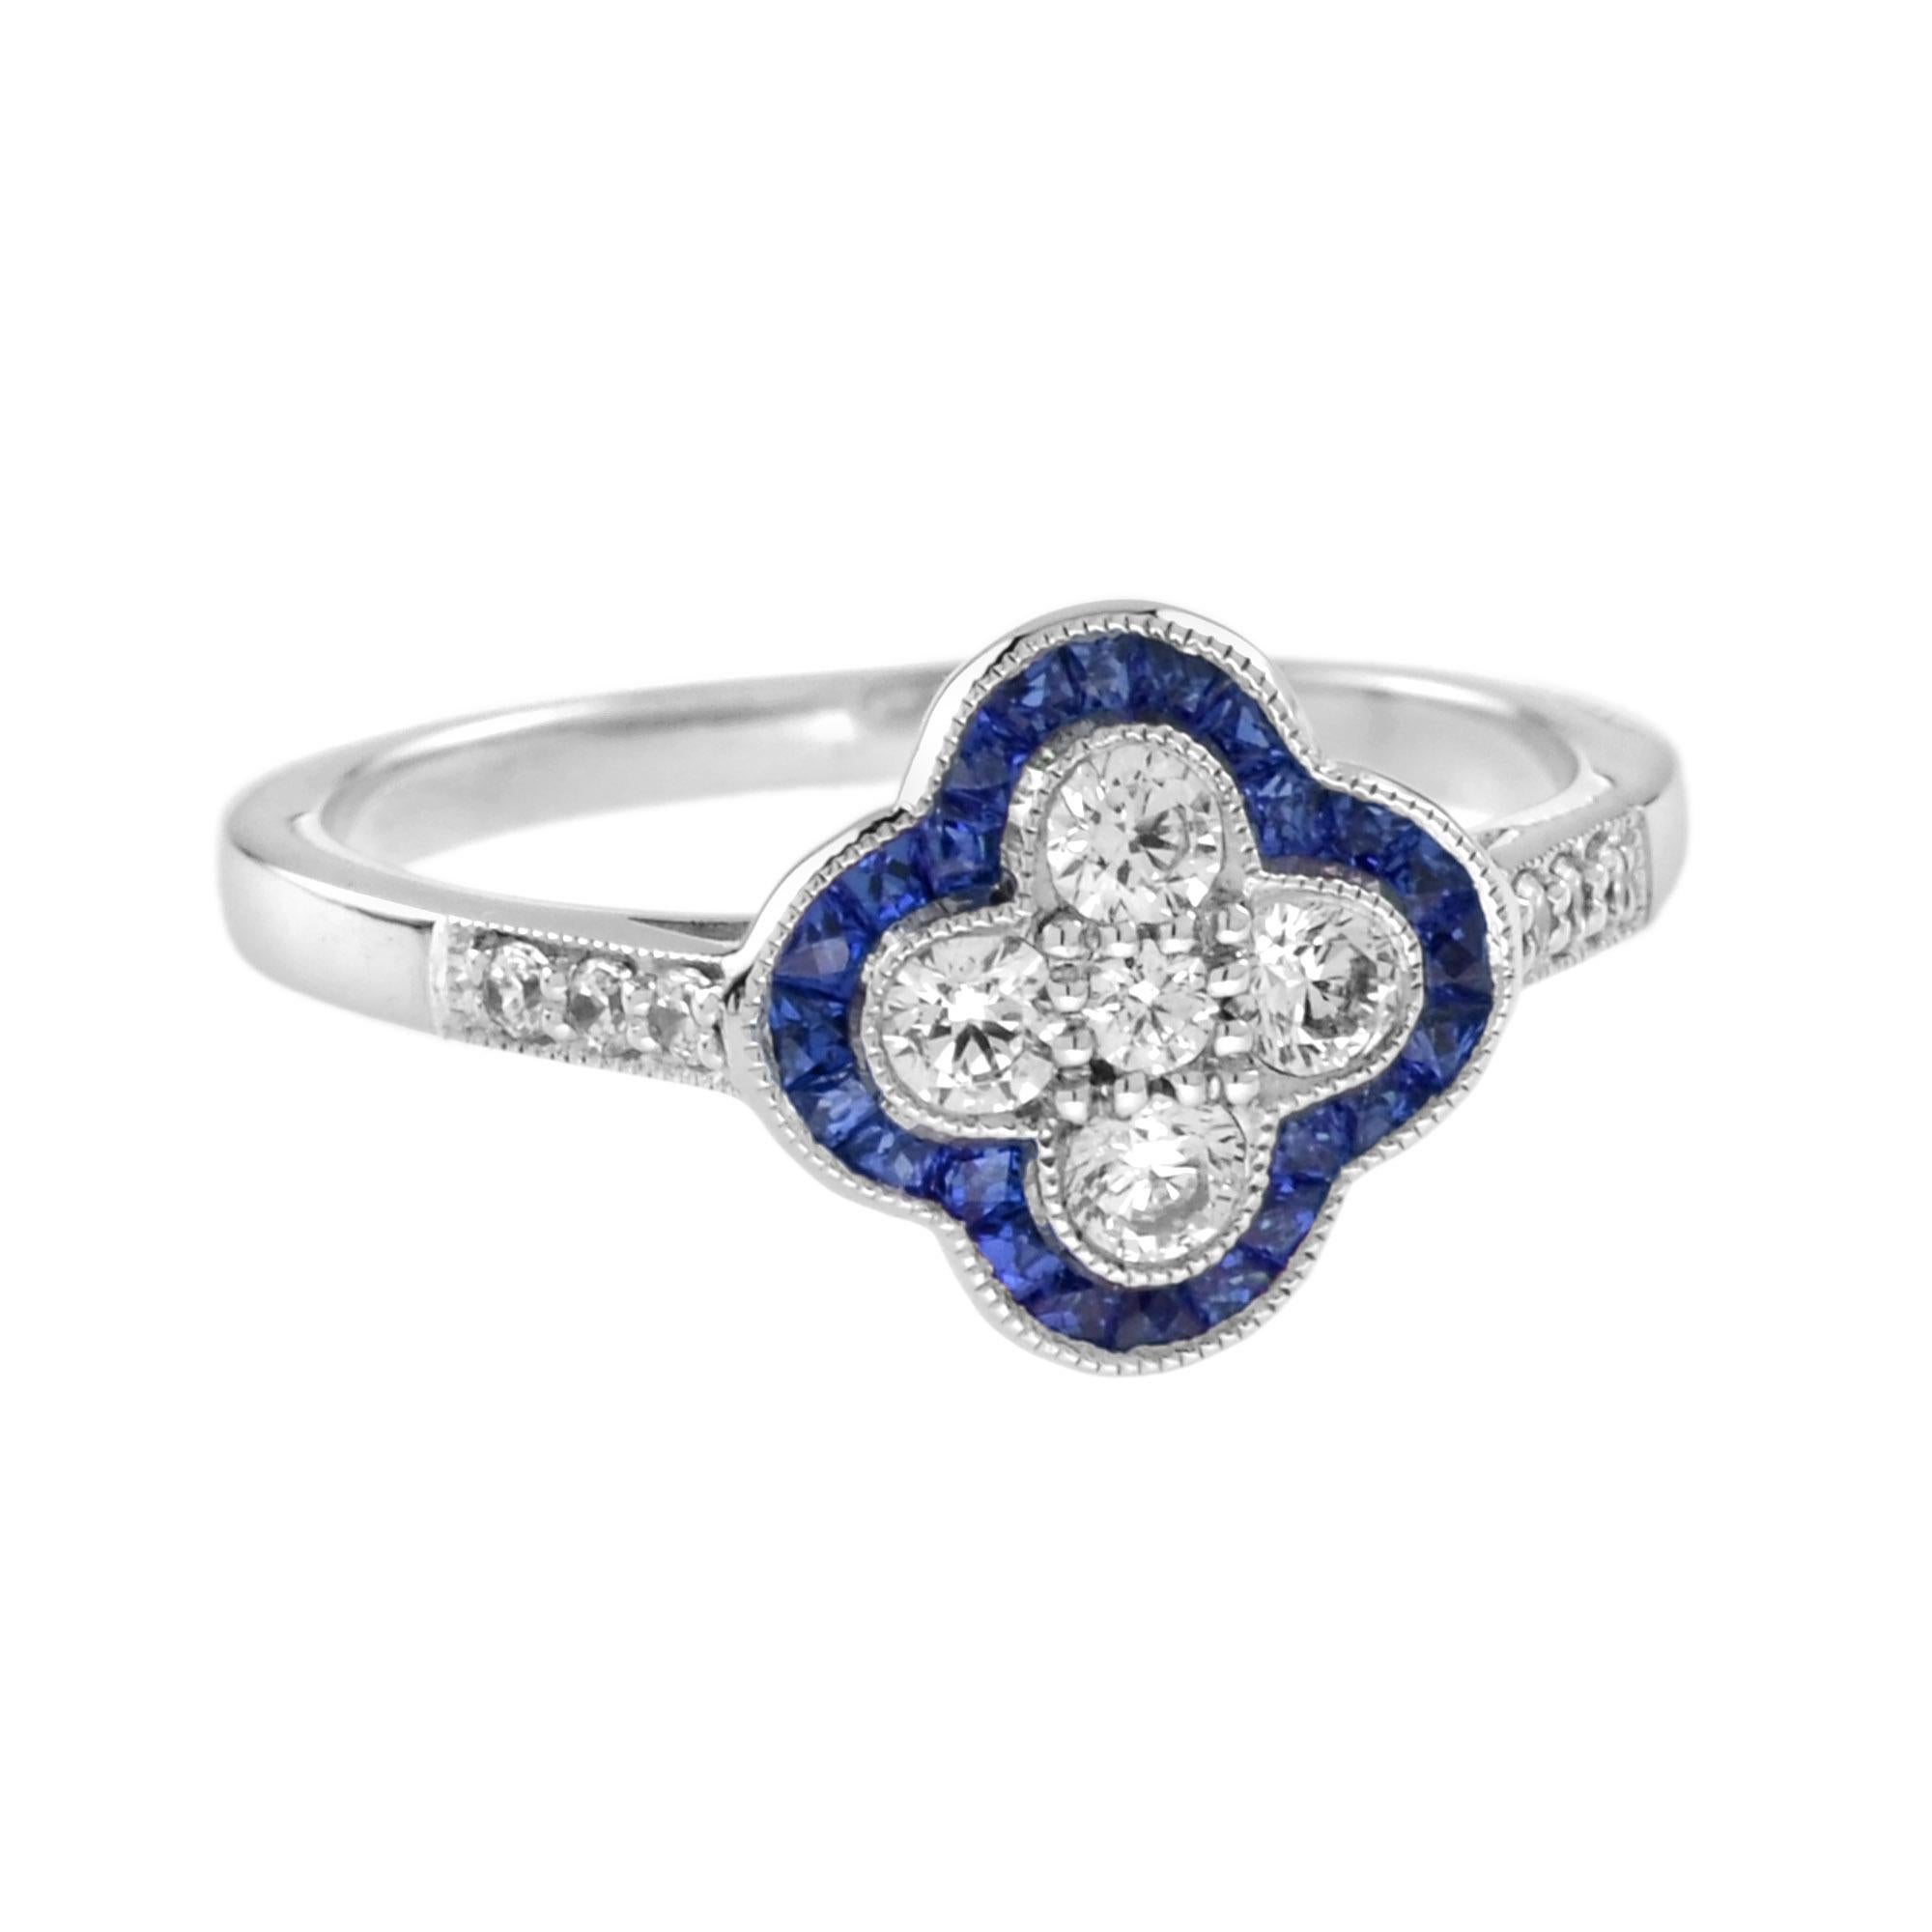 For Sale:  Diamond and Blue Sapphire Art Deco Style Floral Ring in 18K White Gold 2